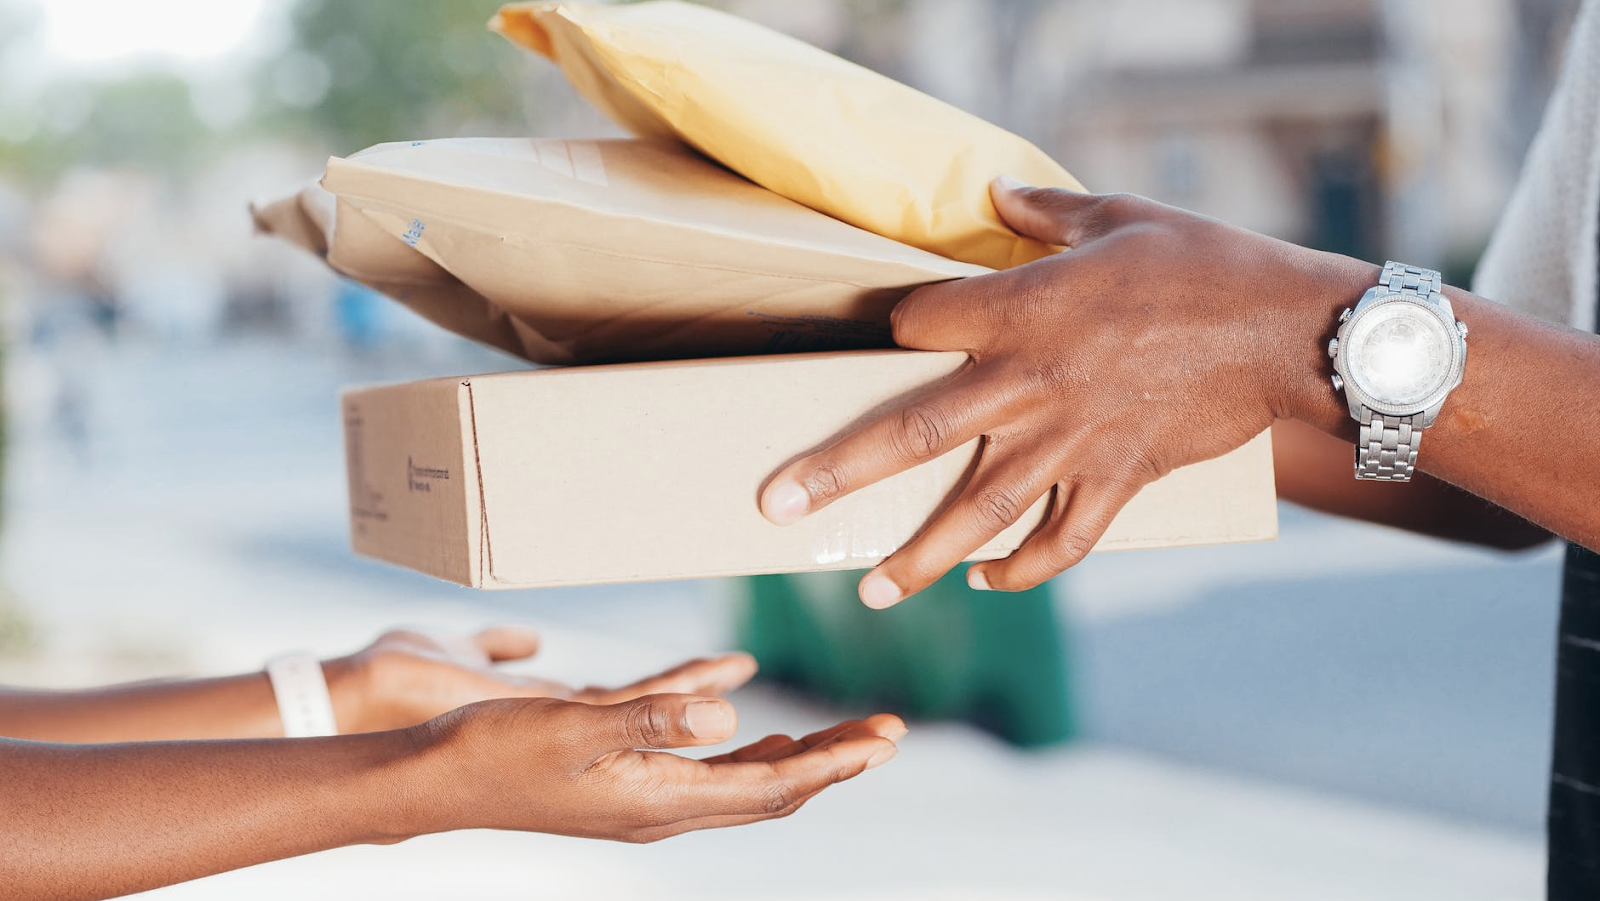 The Ultimate Guide to Starting a Successful Delivery Business